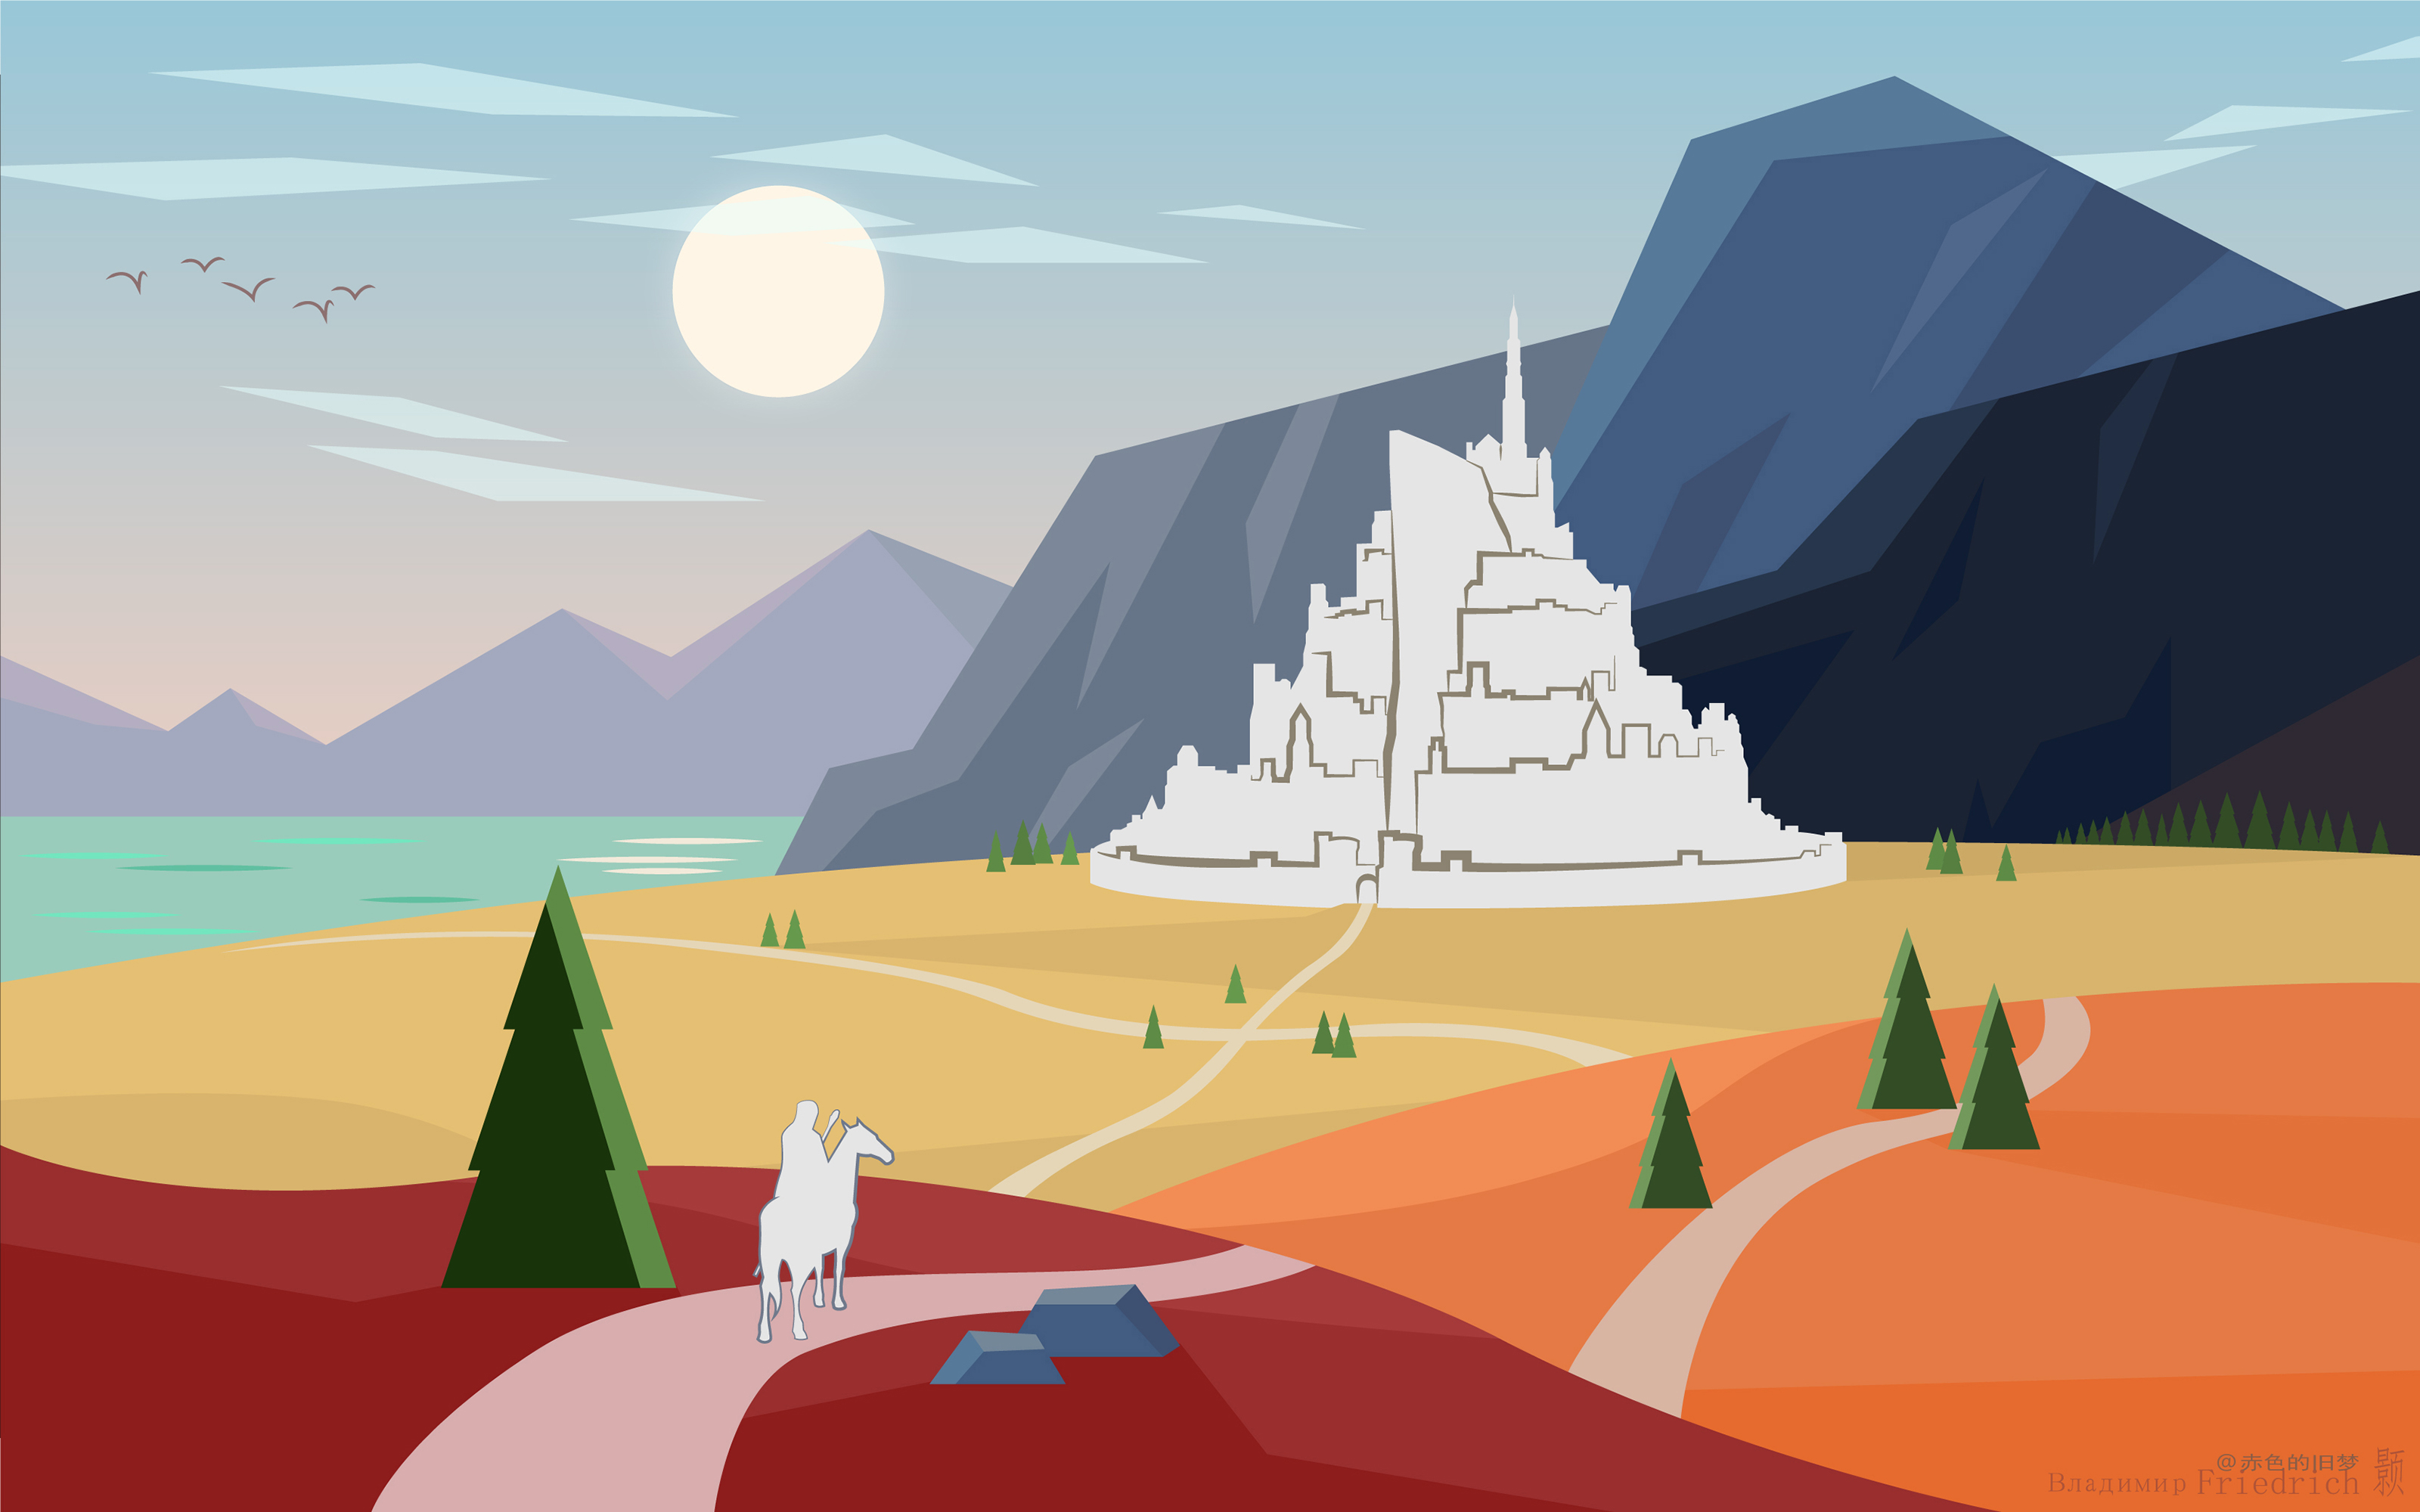 General 3200x2000 Flatdesign landscape The Lord of the Rings Gandalf Minas Tirith minimalism mountains water path castle digital art